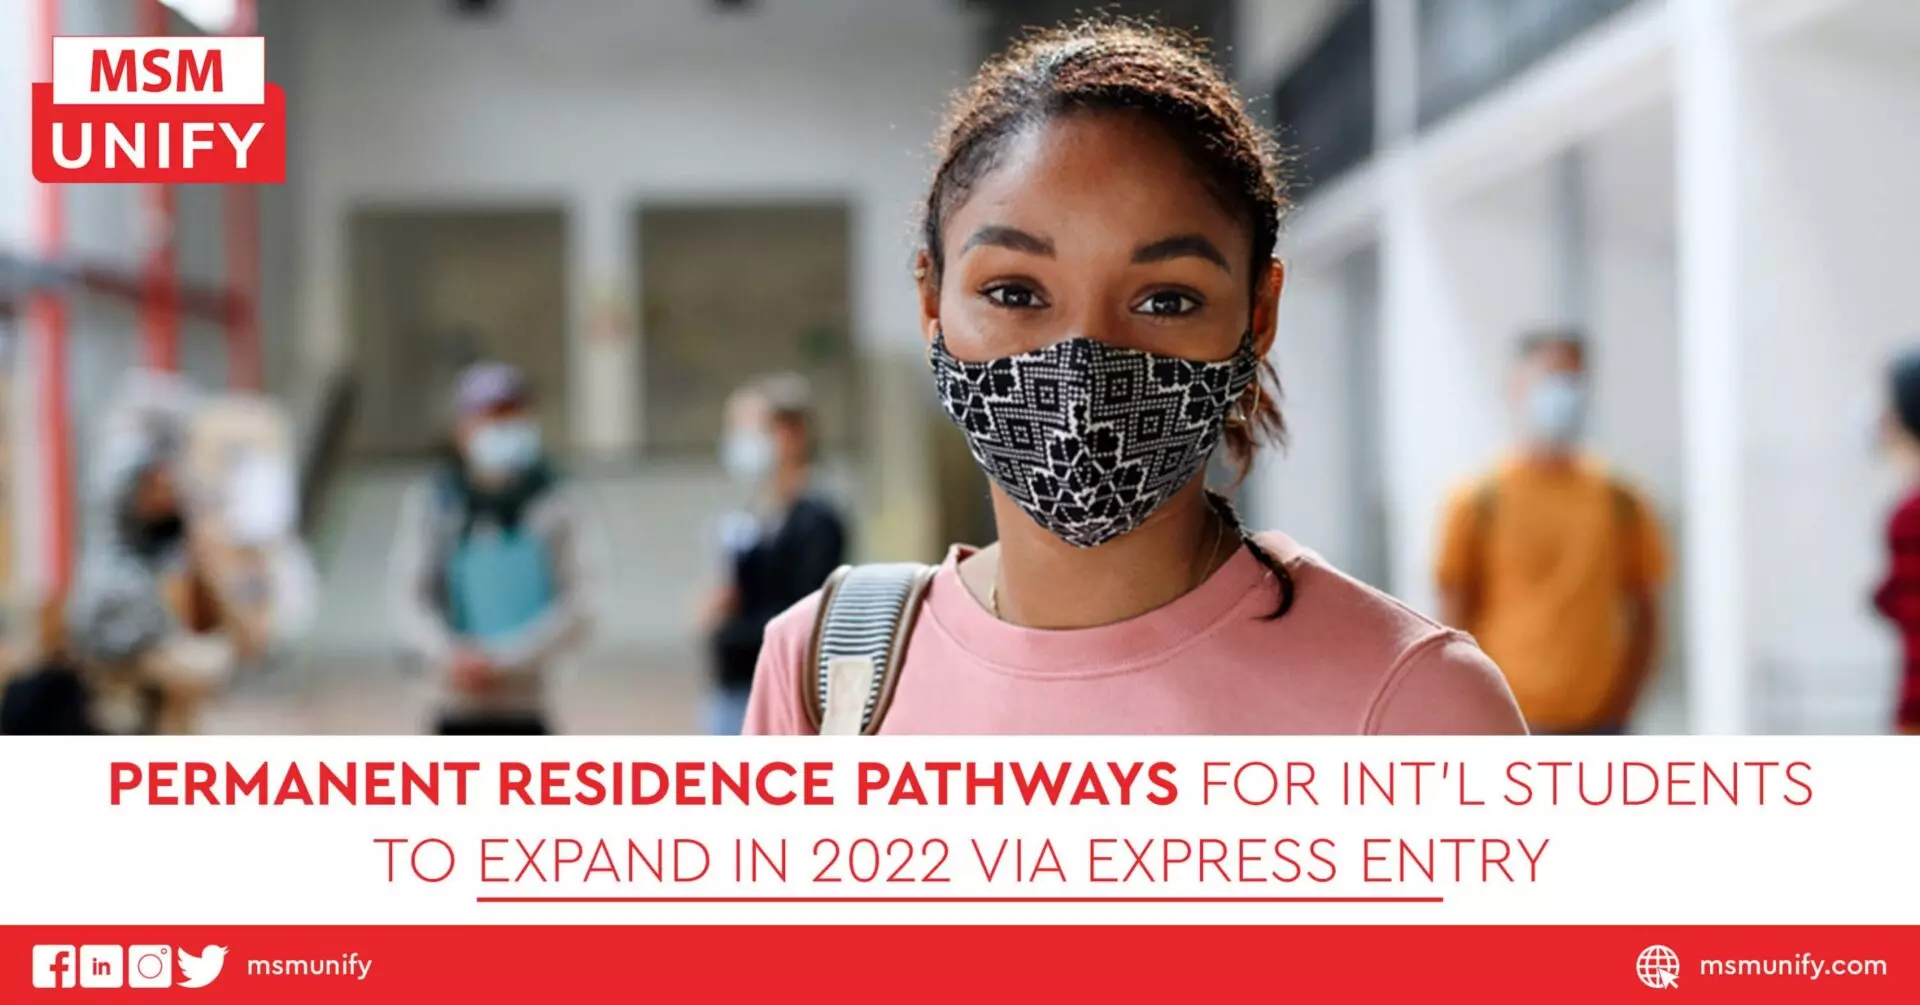 Permanent Residence Pathways for Intl Students To Expand in 2022 Via Express Entry scaled 1